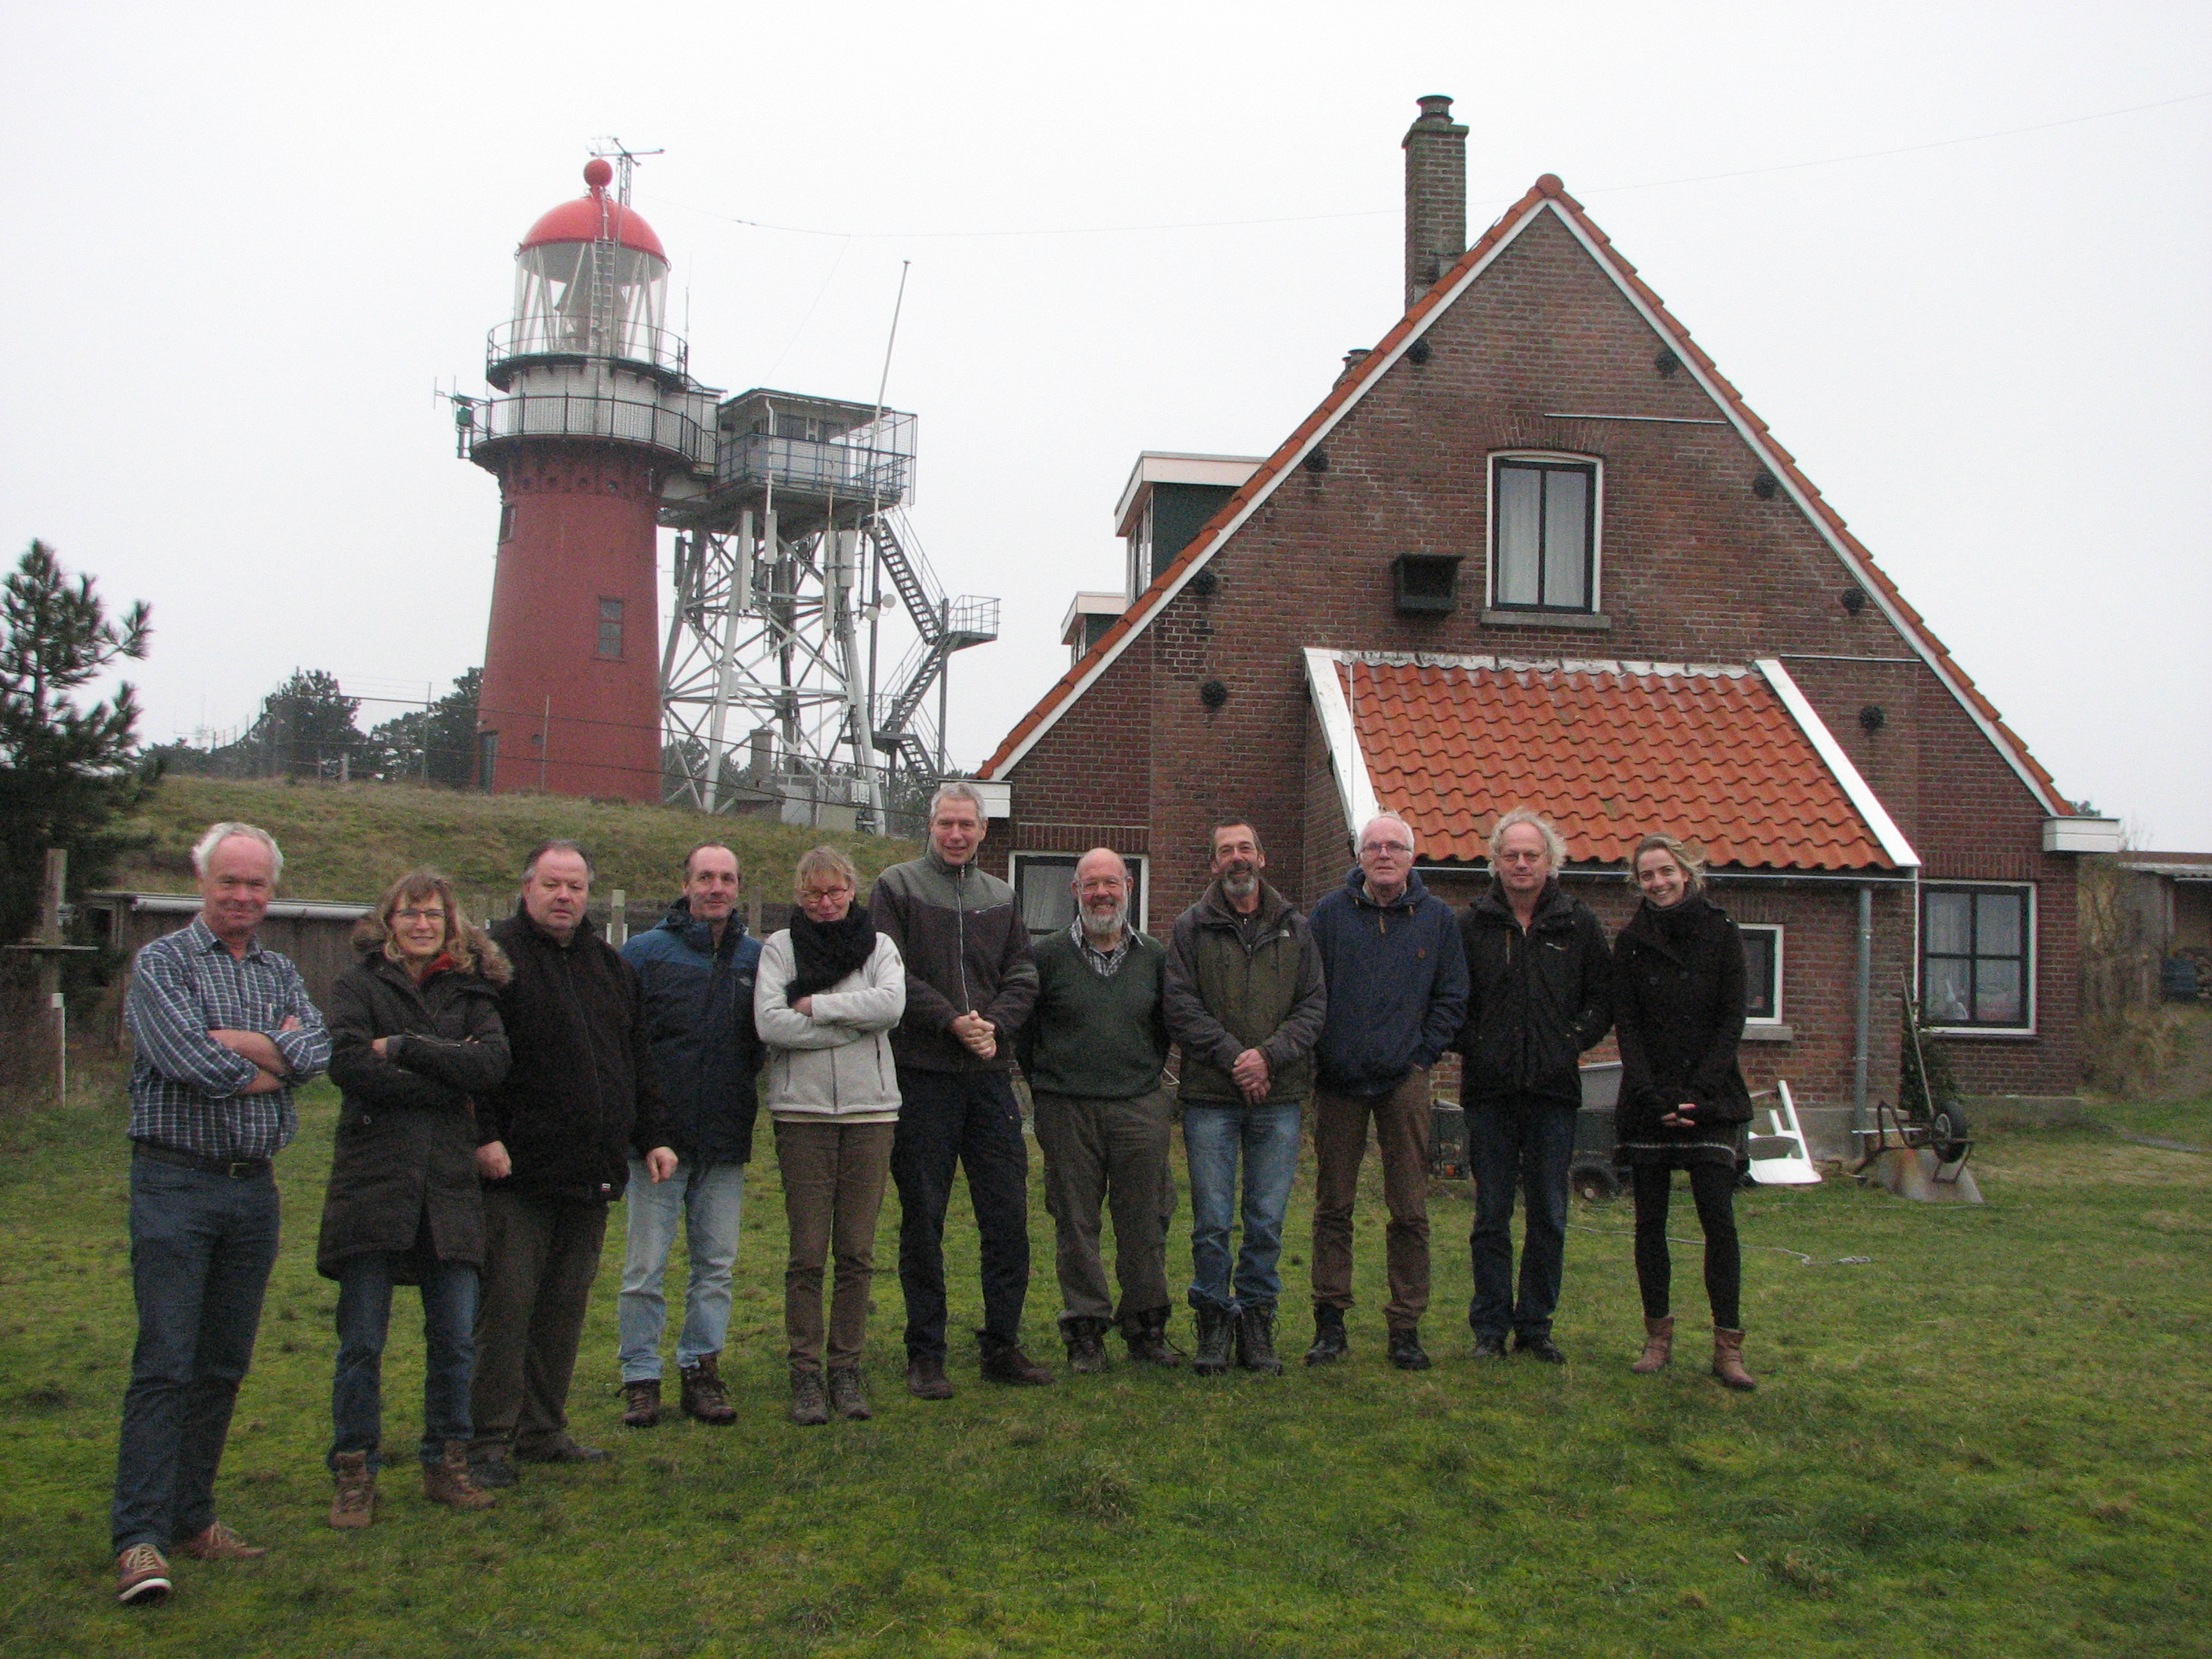 Eleven people posing in front of a stone house. A red lighthouse in the background.